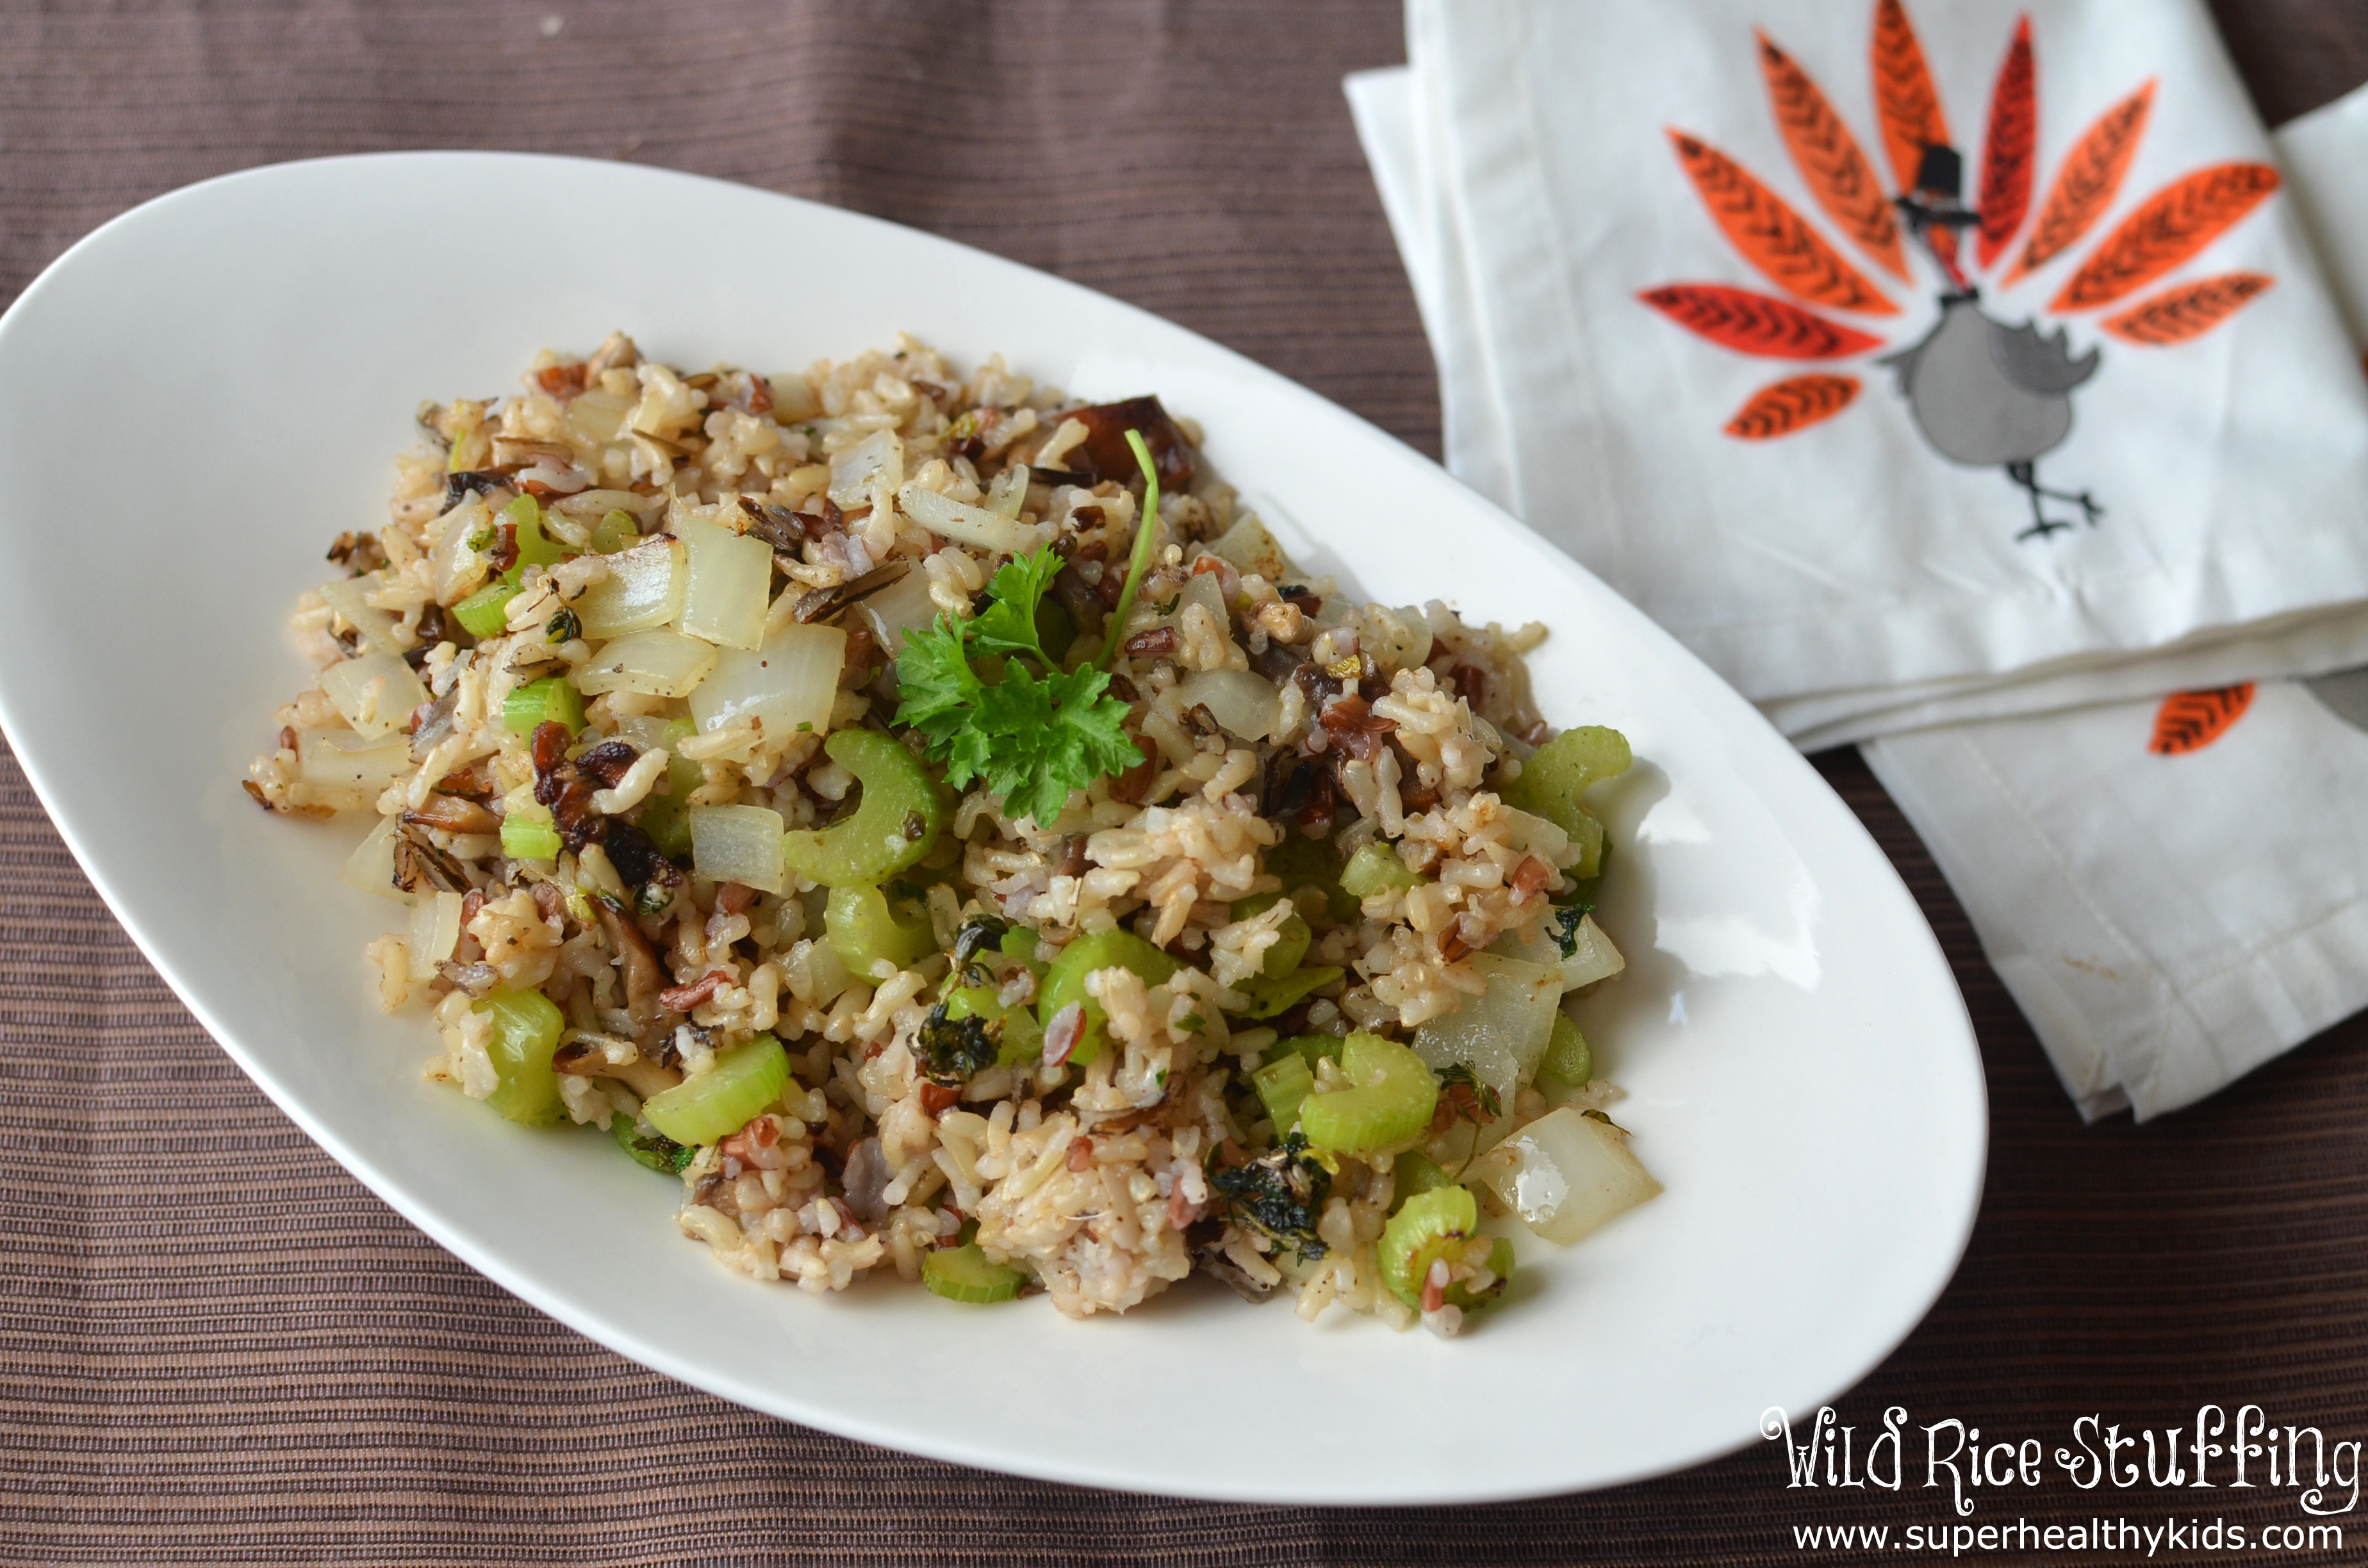 Is Wild Rice Healthy
 Your plete Healthy Holiday Meal with Wild Rice Stuffing